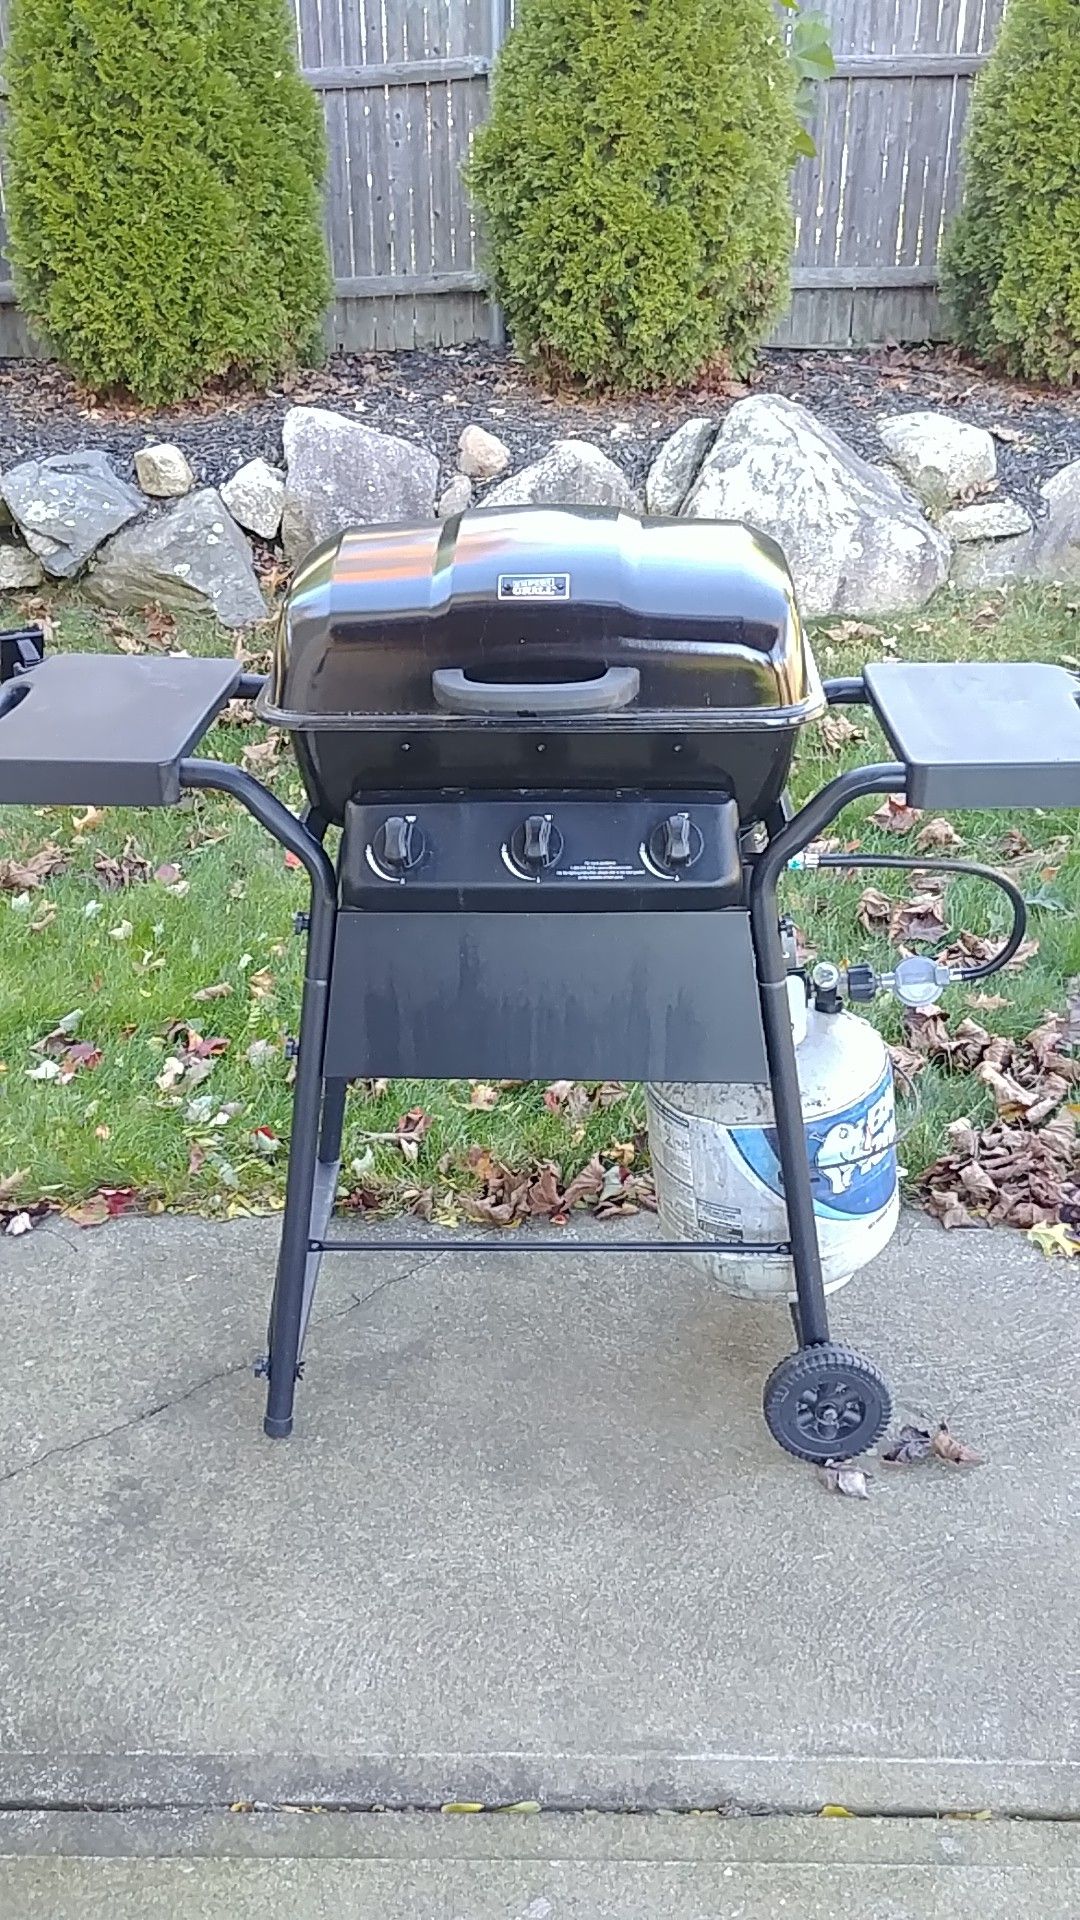 Grill with tank of gas